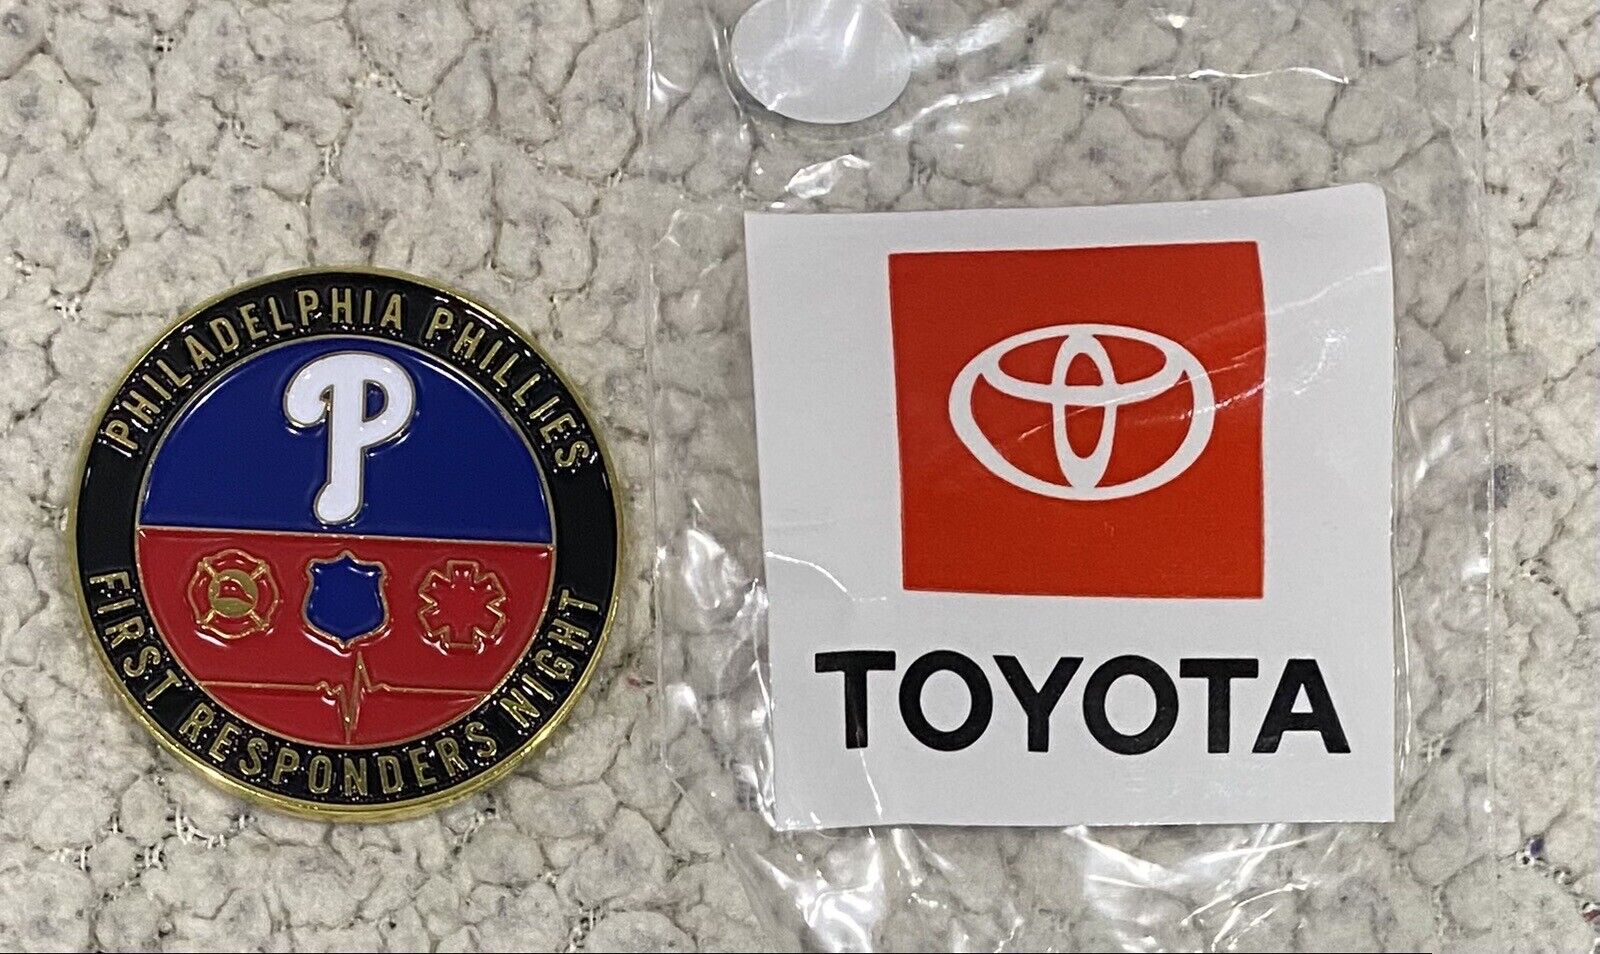 2023 BRAND NEW PHILLIES SGA 9/11/2023 FIRST RESPONDERS CHALLENGE COIN by Toyota